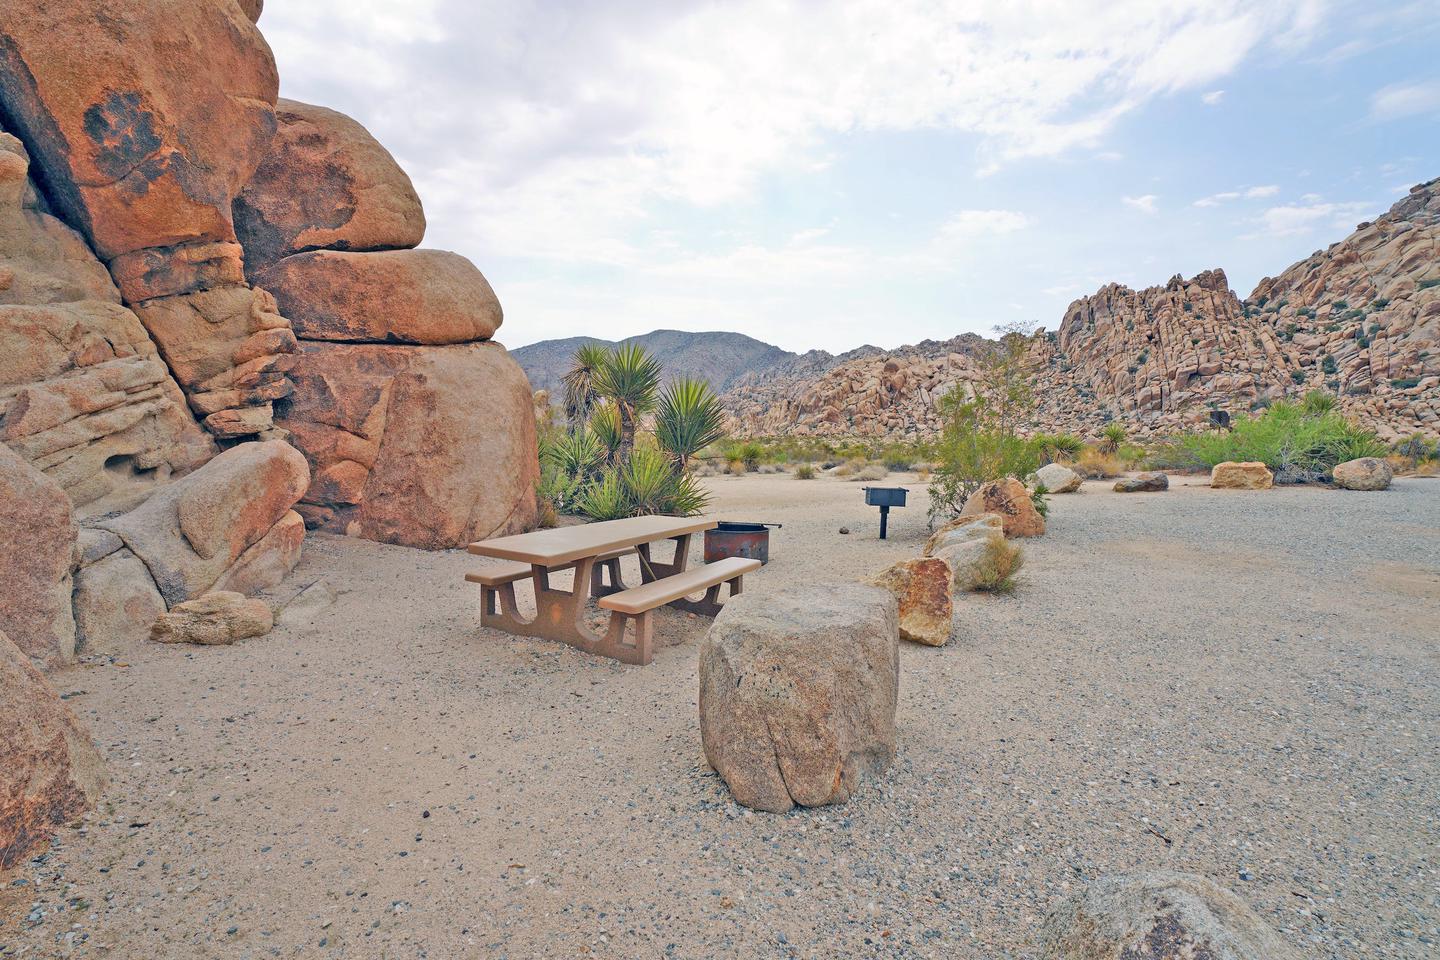 Campsite  with picnic table surrounded by boulders .Campsite.